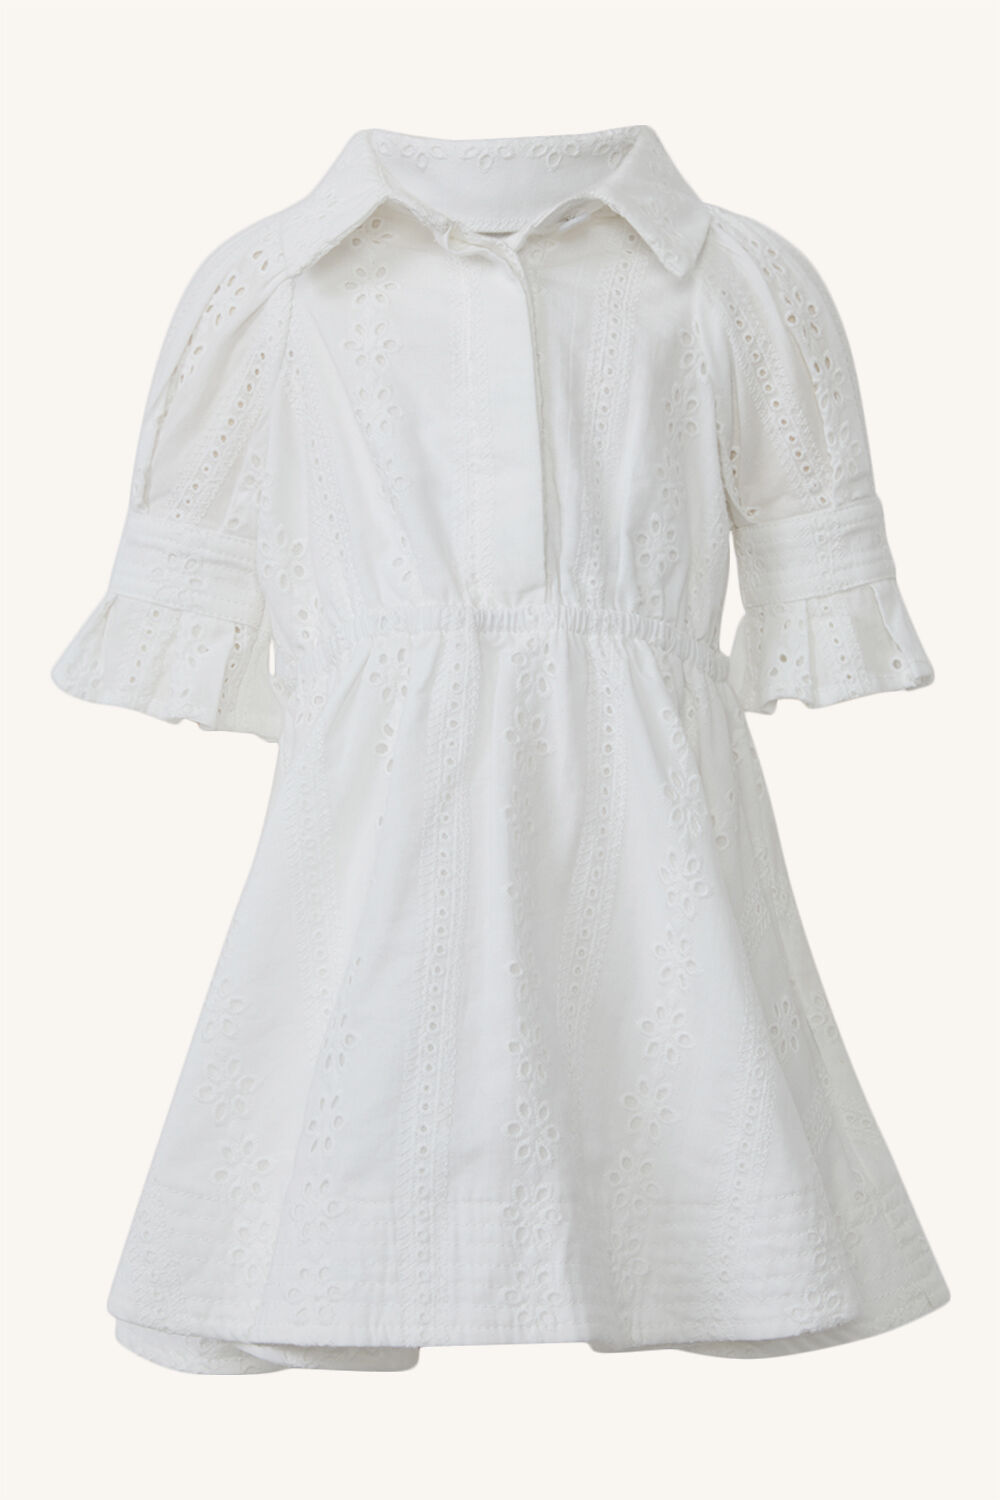 BABY GIRL MINI BROIDERIE DRESS in colour CLOUD DANCER